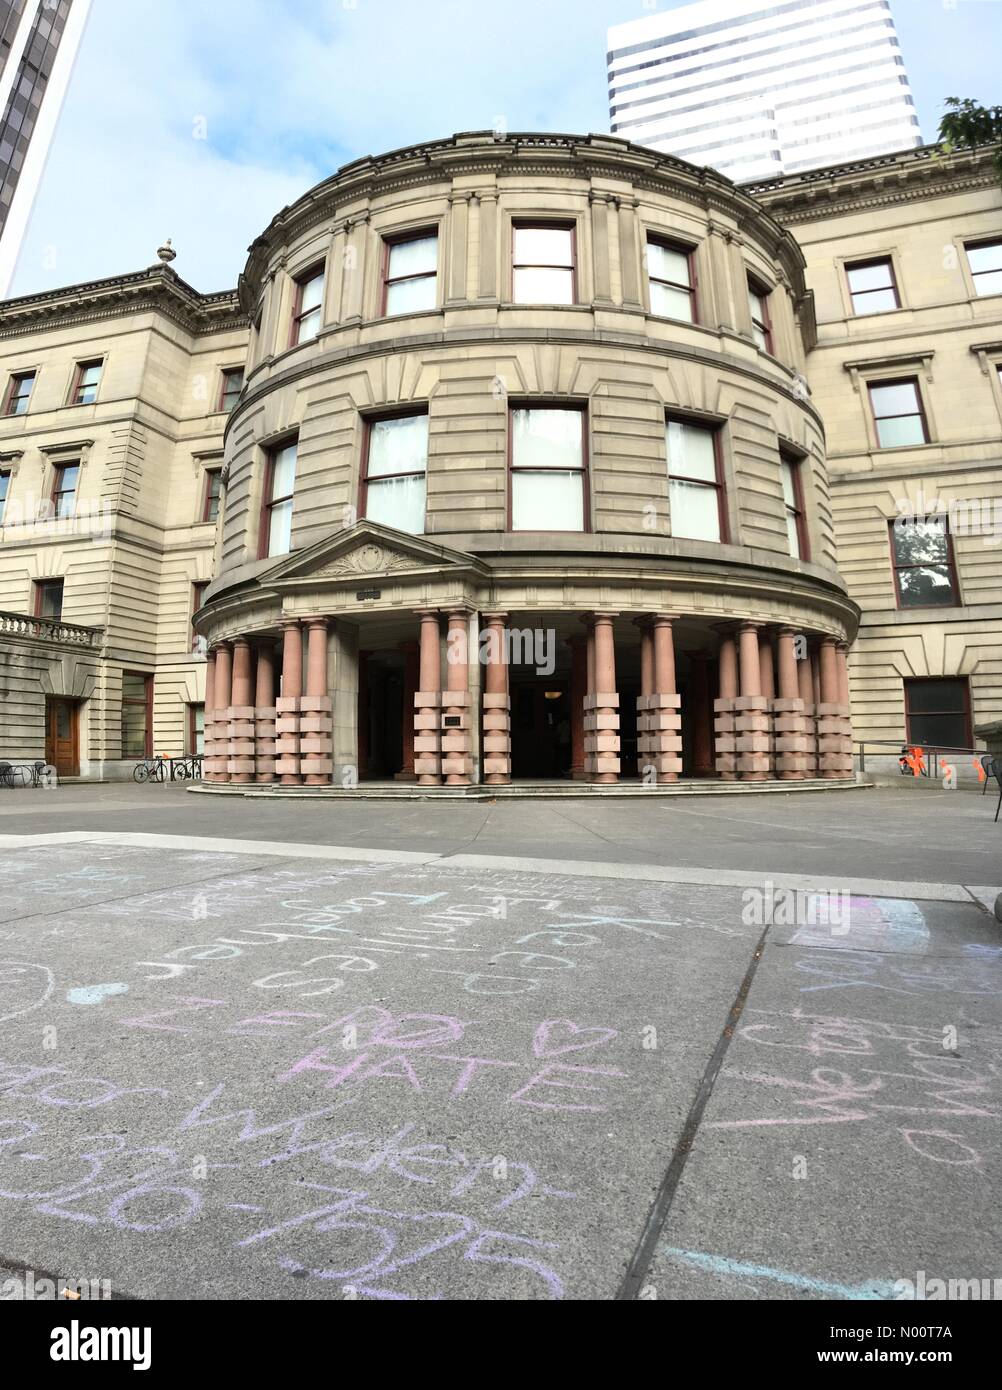 Portland, Oregon, USA. 10th July, 2018. Protest messages about the ICE office and the family separation policy in chalk on the sidewalk in front of Portland City Hall Credit: David Krug/StockimoNews/Alamy Live News Stock Photo